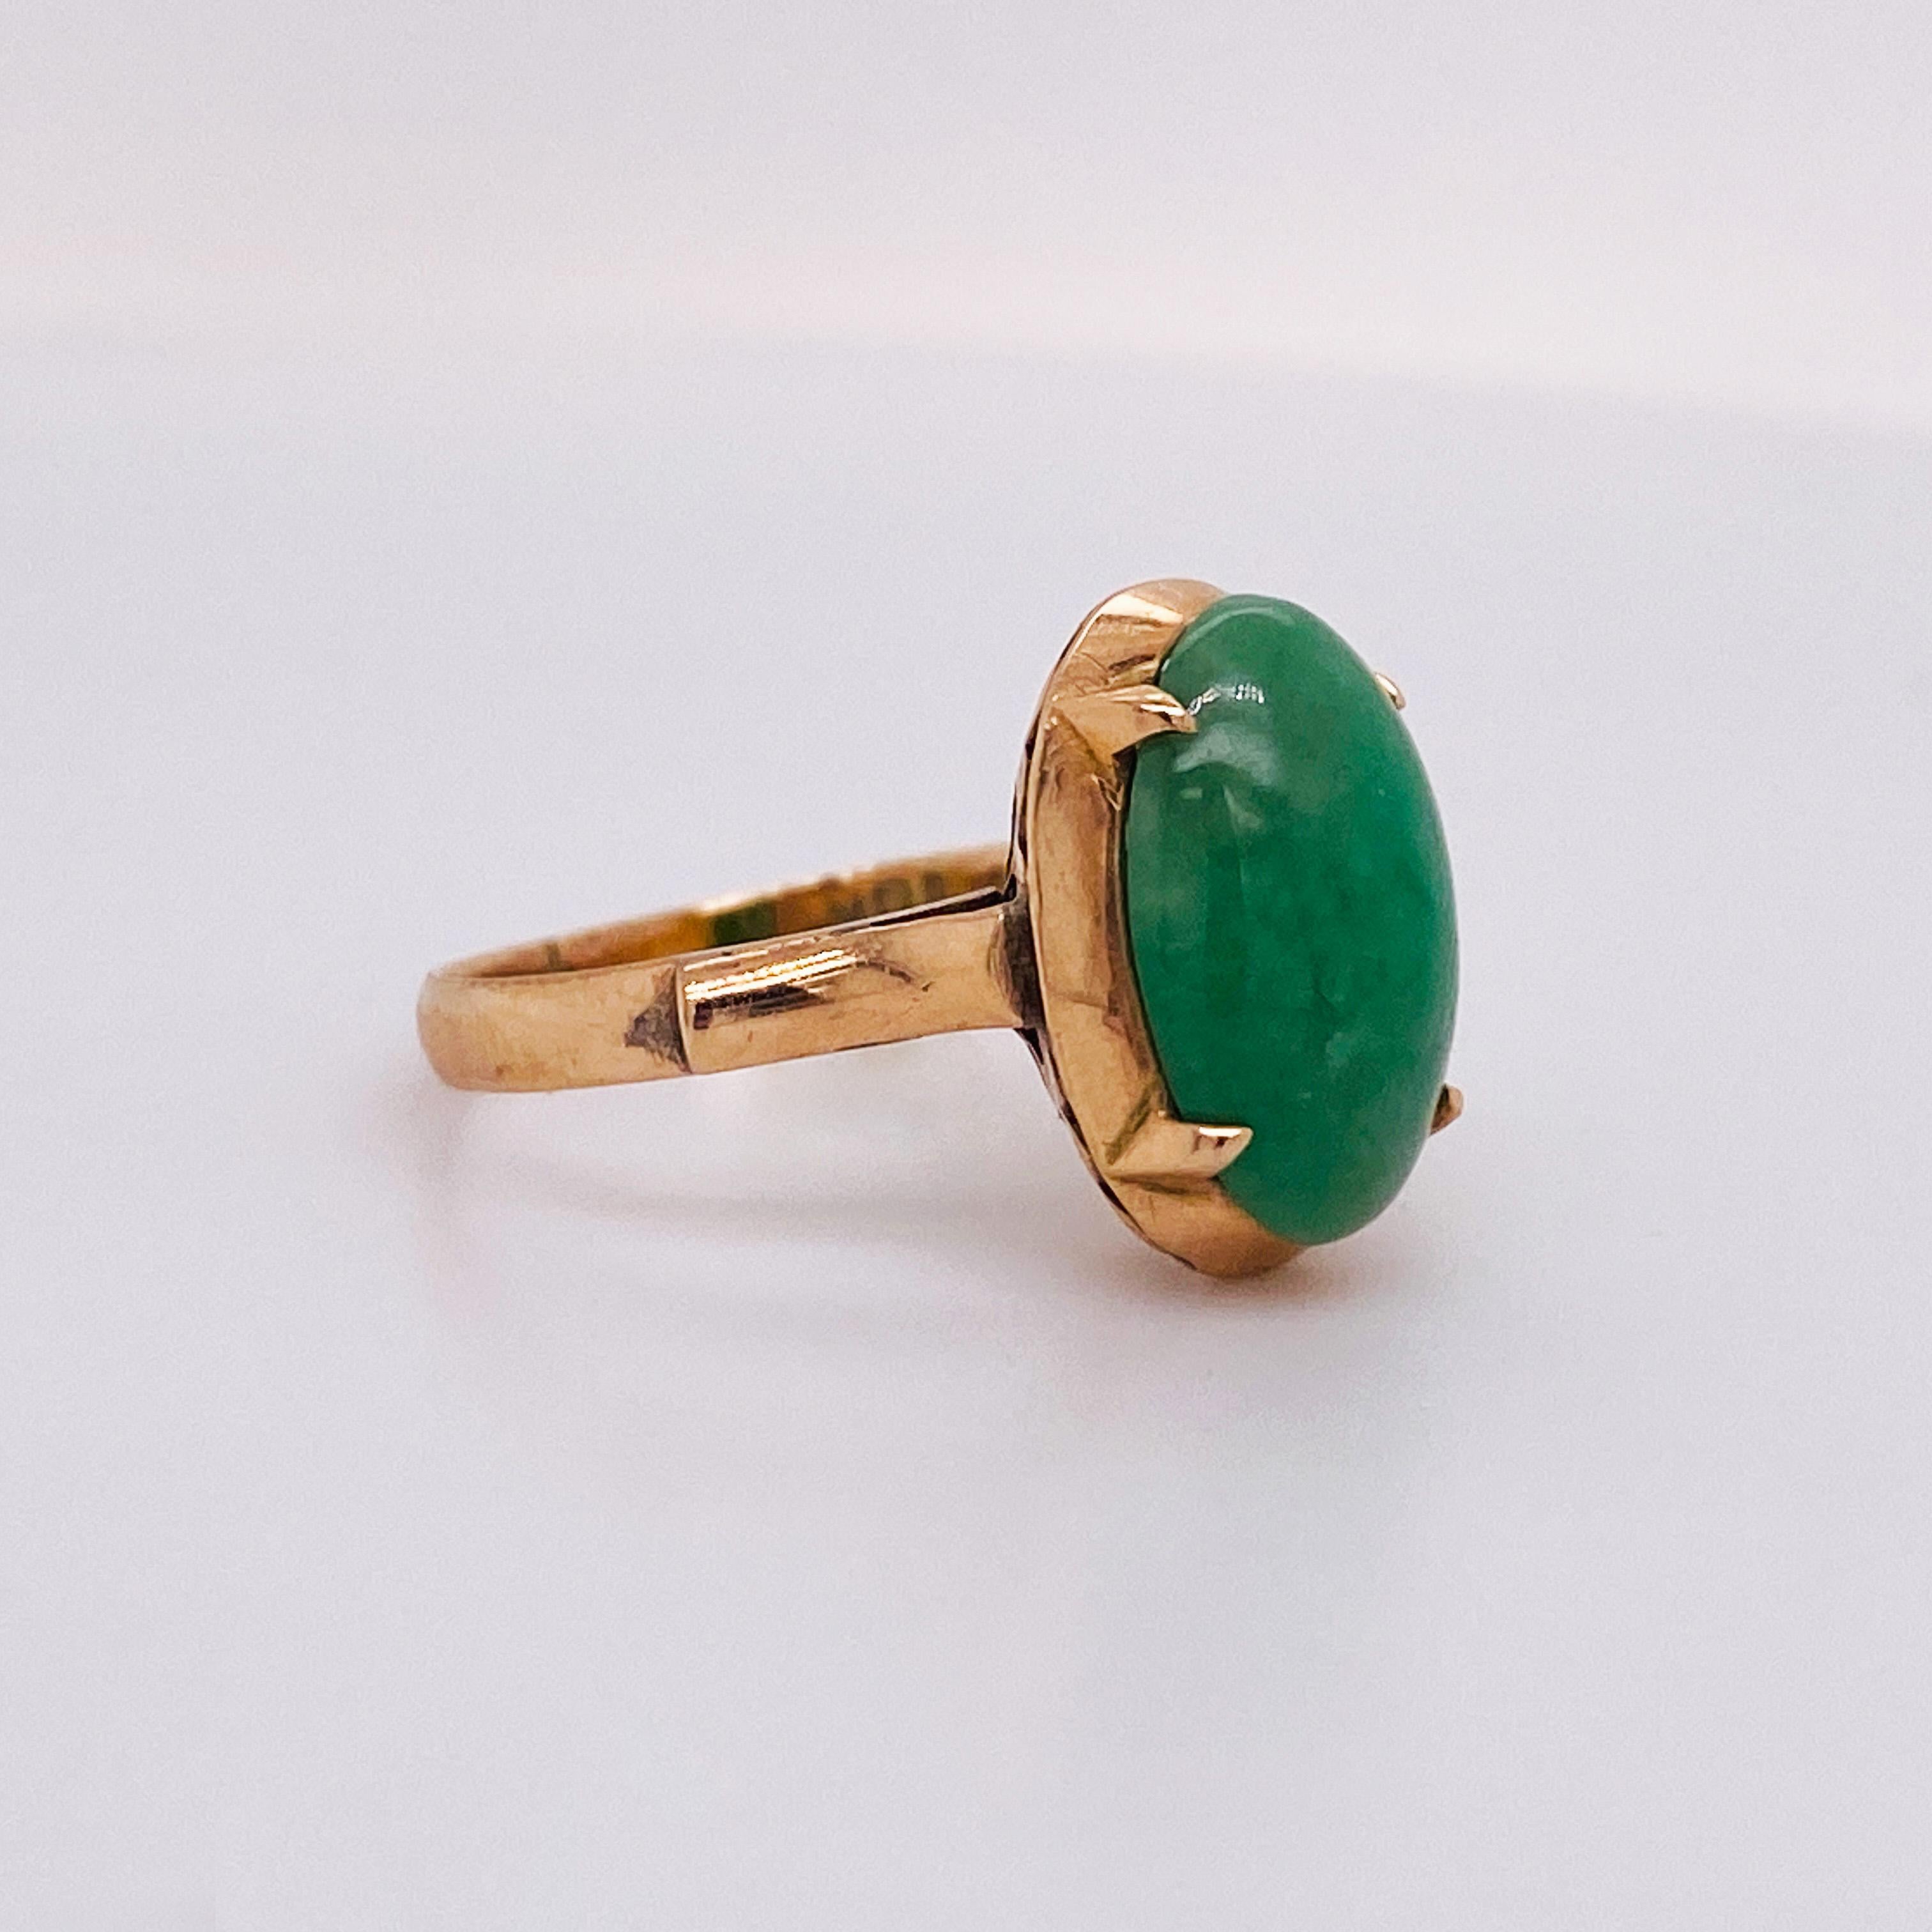 Oval Cut Classic Jade Oval Cabochon Ring 18k Yellow Gold, 2.38 Carats Everyday Style (Lv)